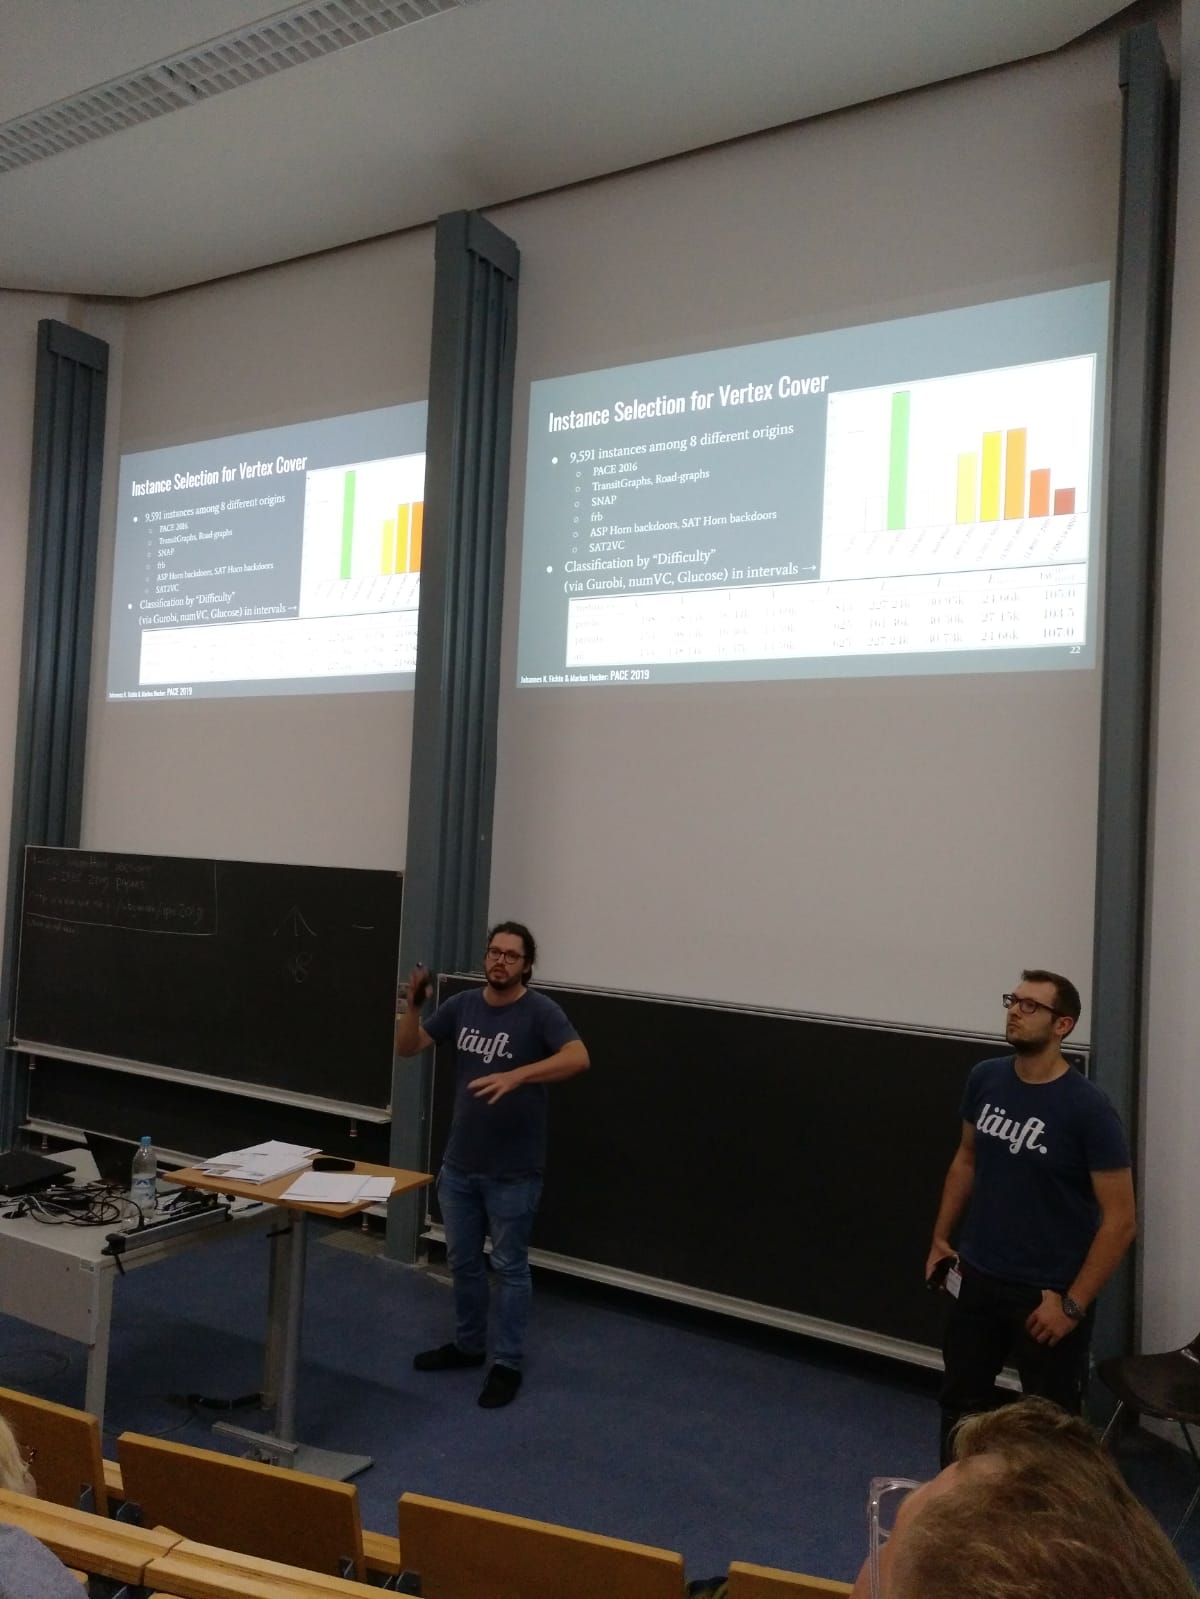 Markus Hecher and Johannes Fichte giving a talk at PACE19 in Munich